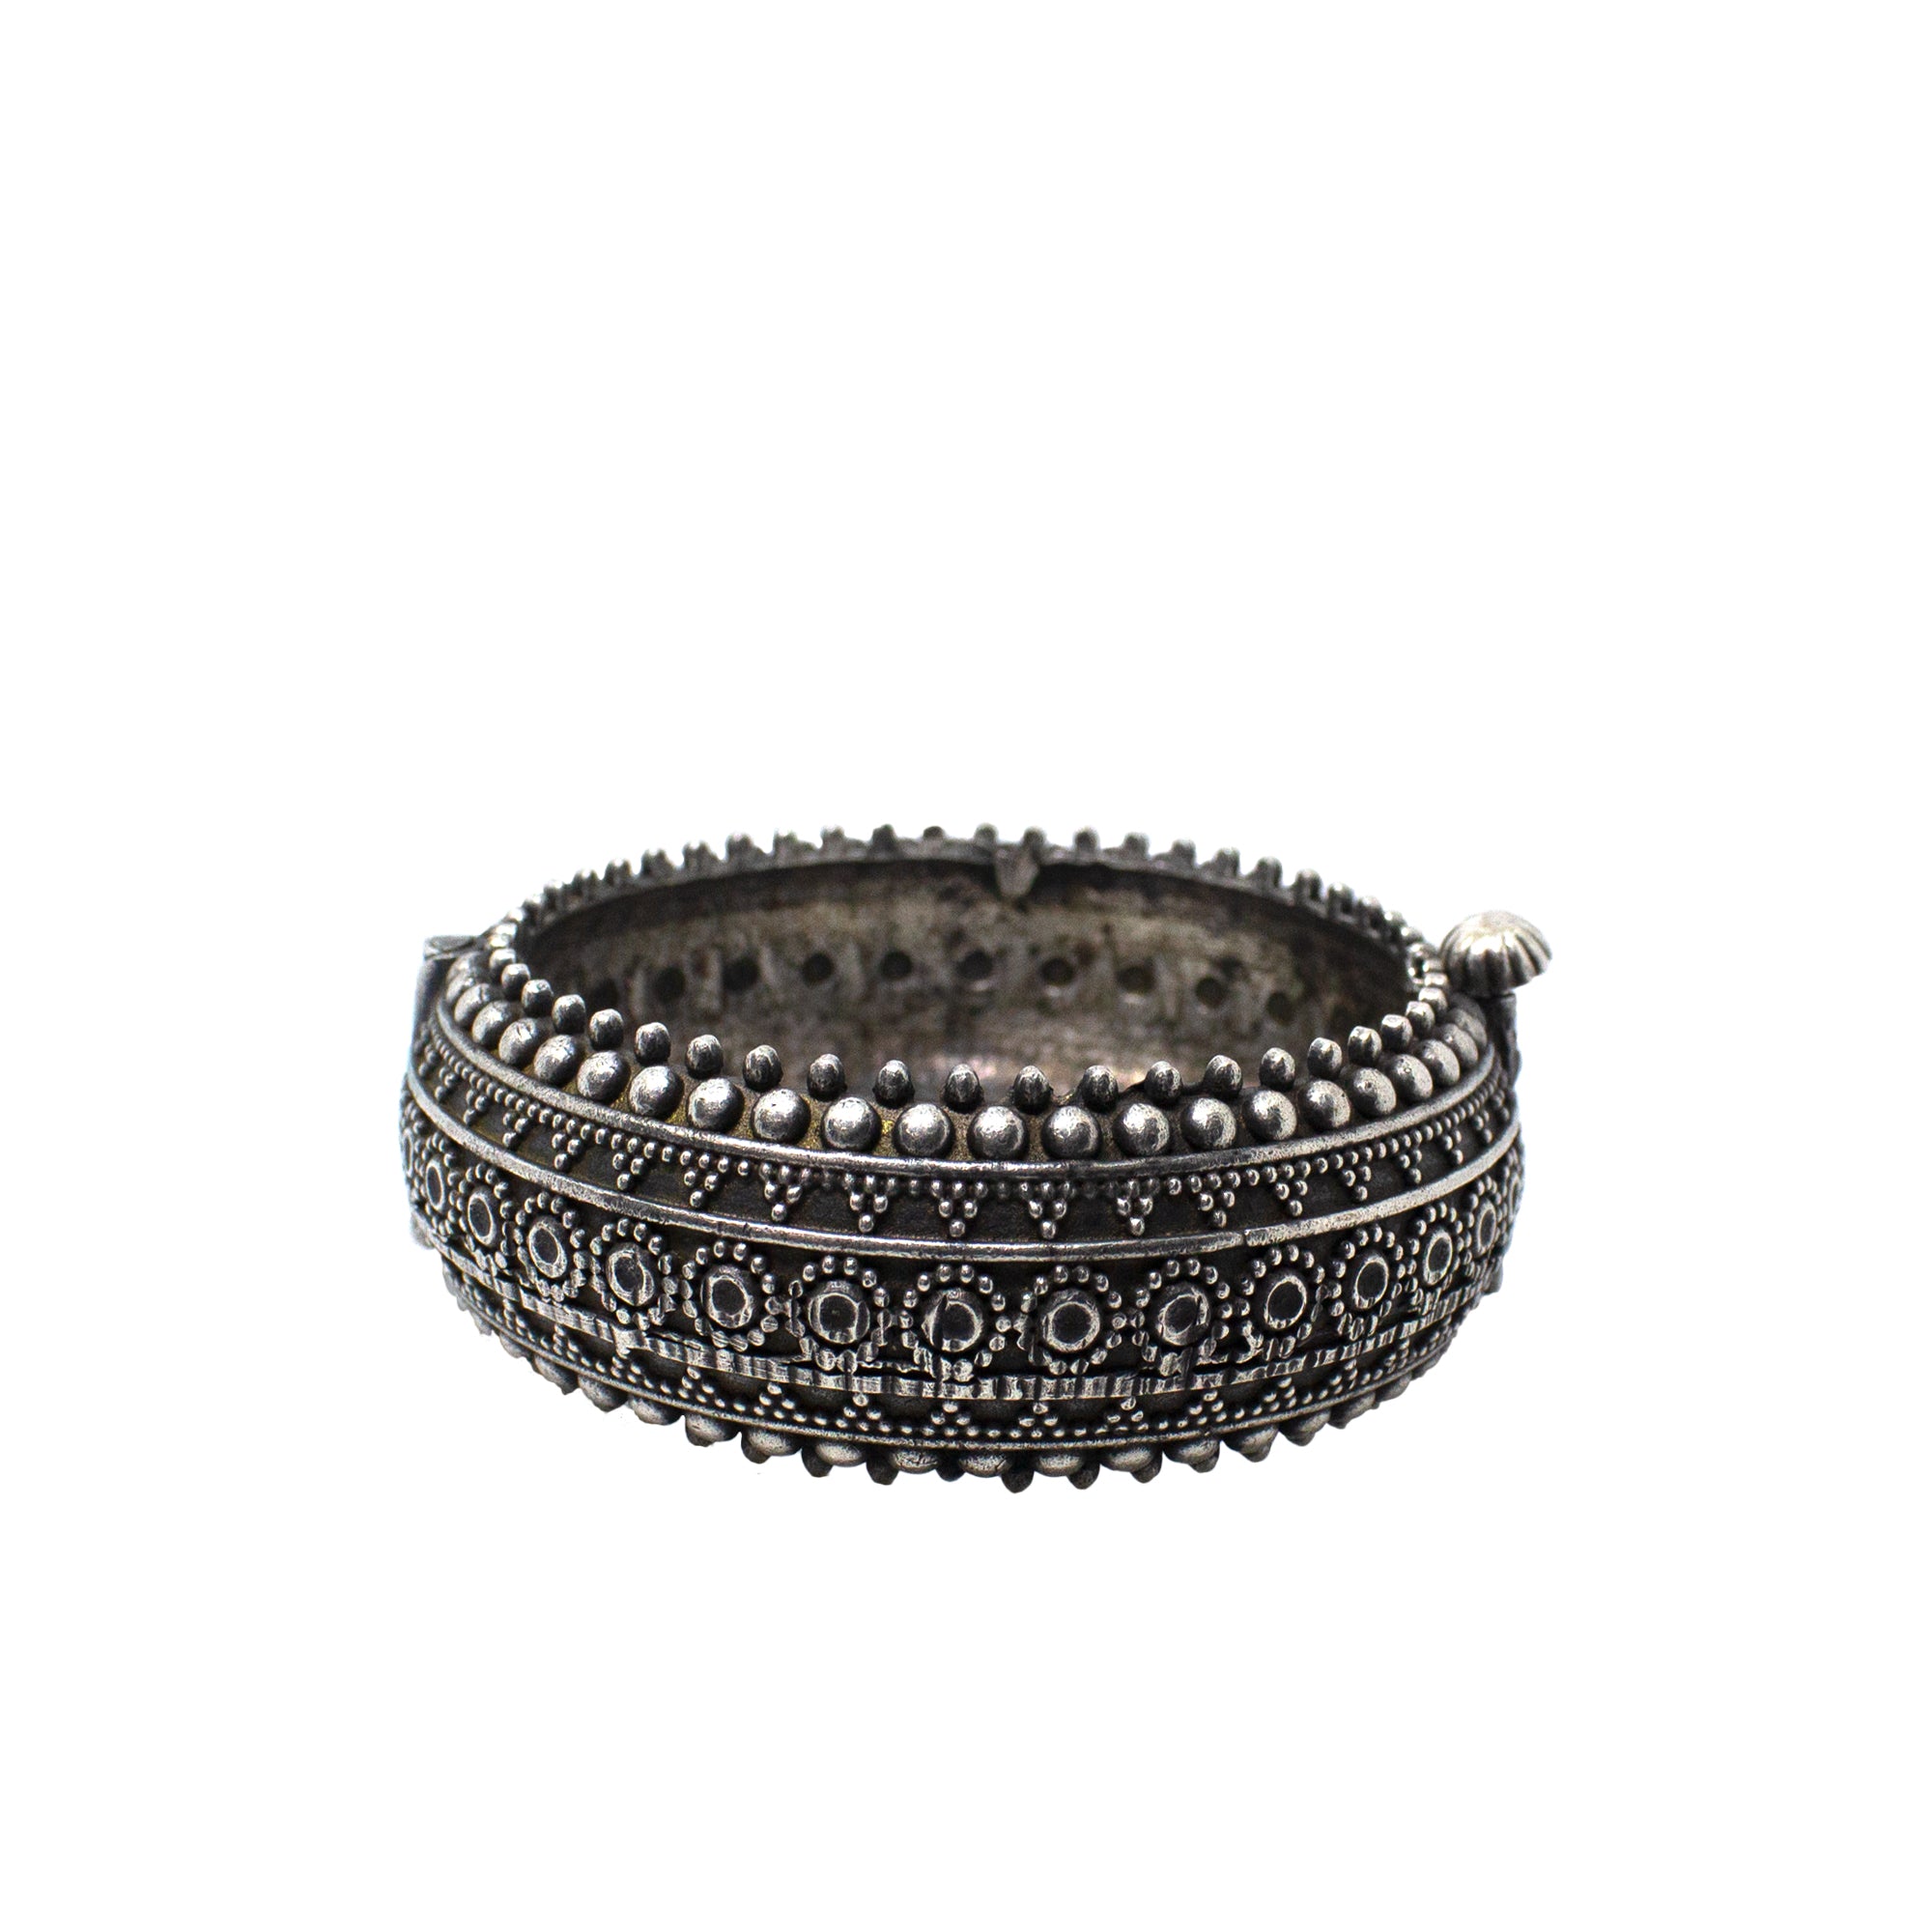 Abhinn Classic Silver Replica Temple Design Bracelet With Studded Silver Beads For Women.